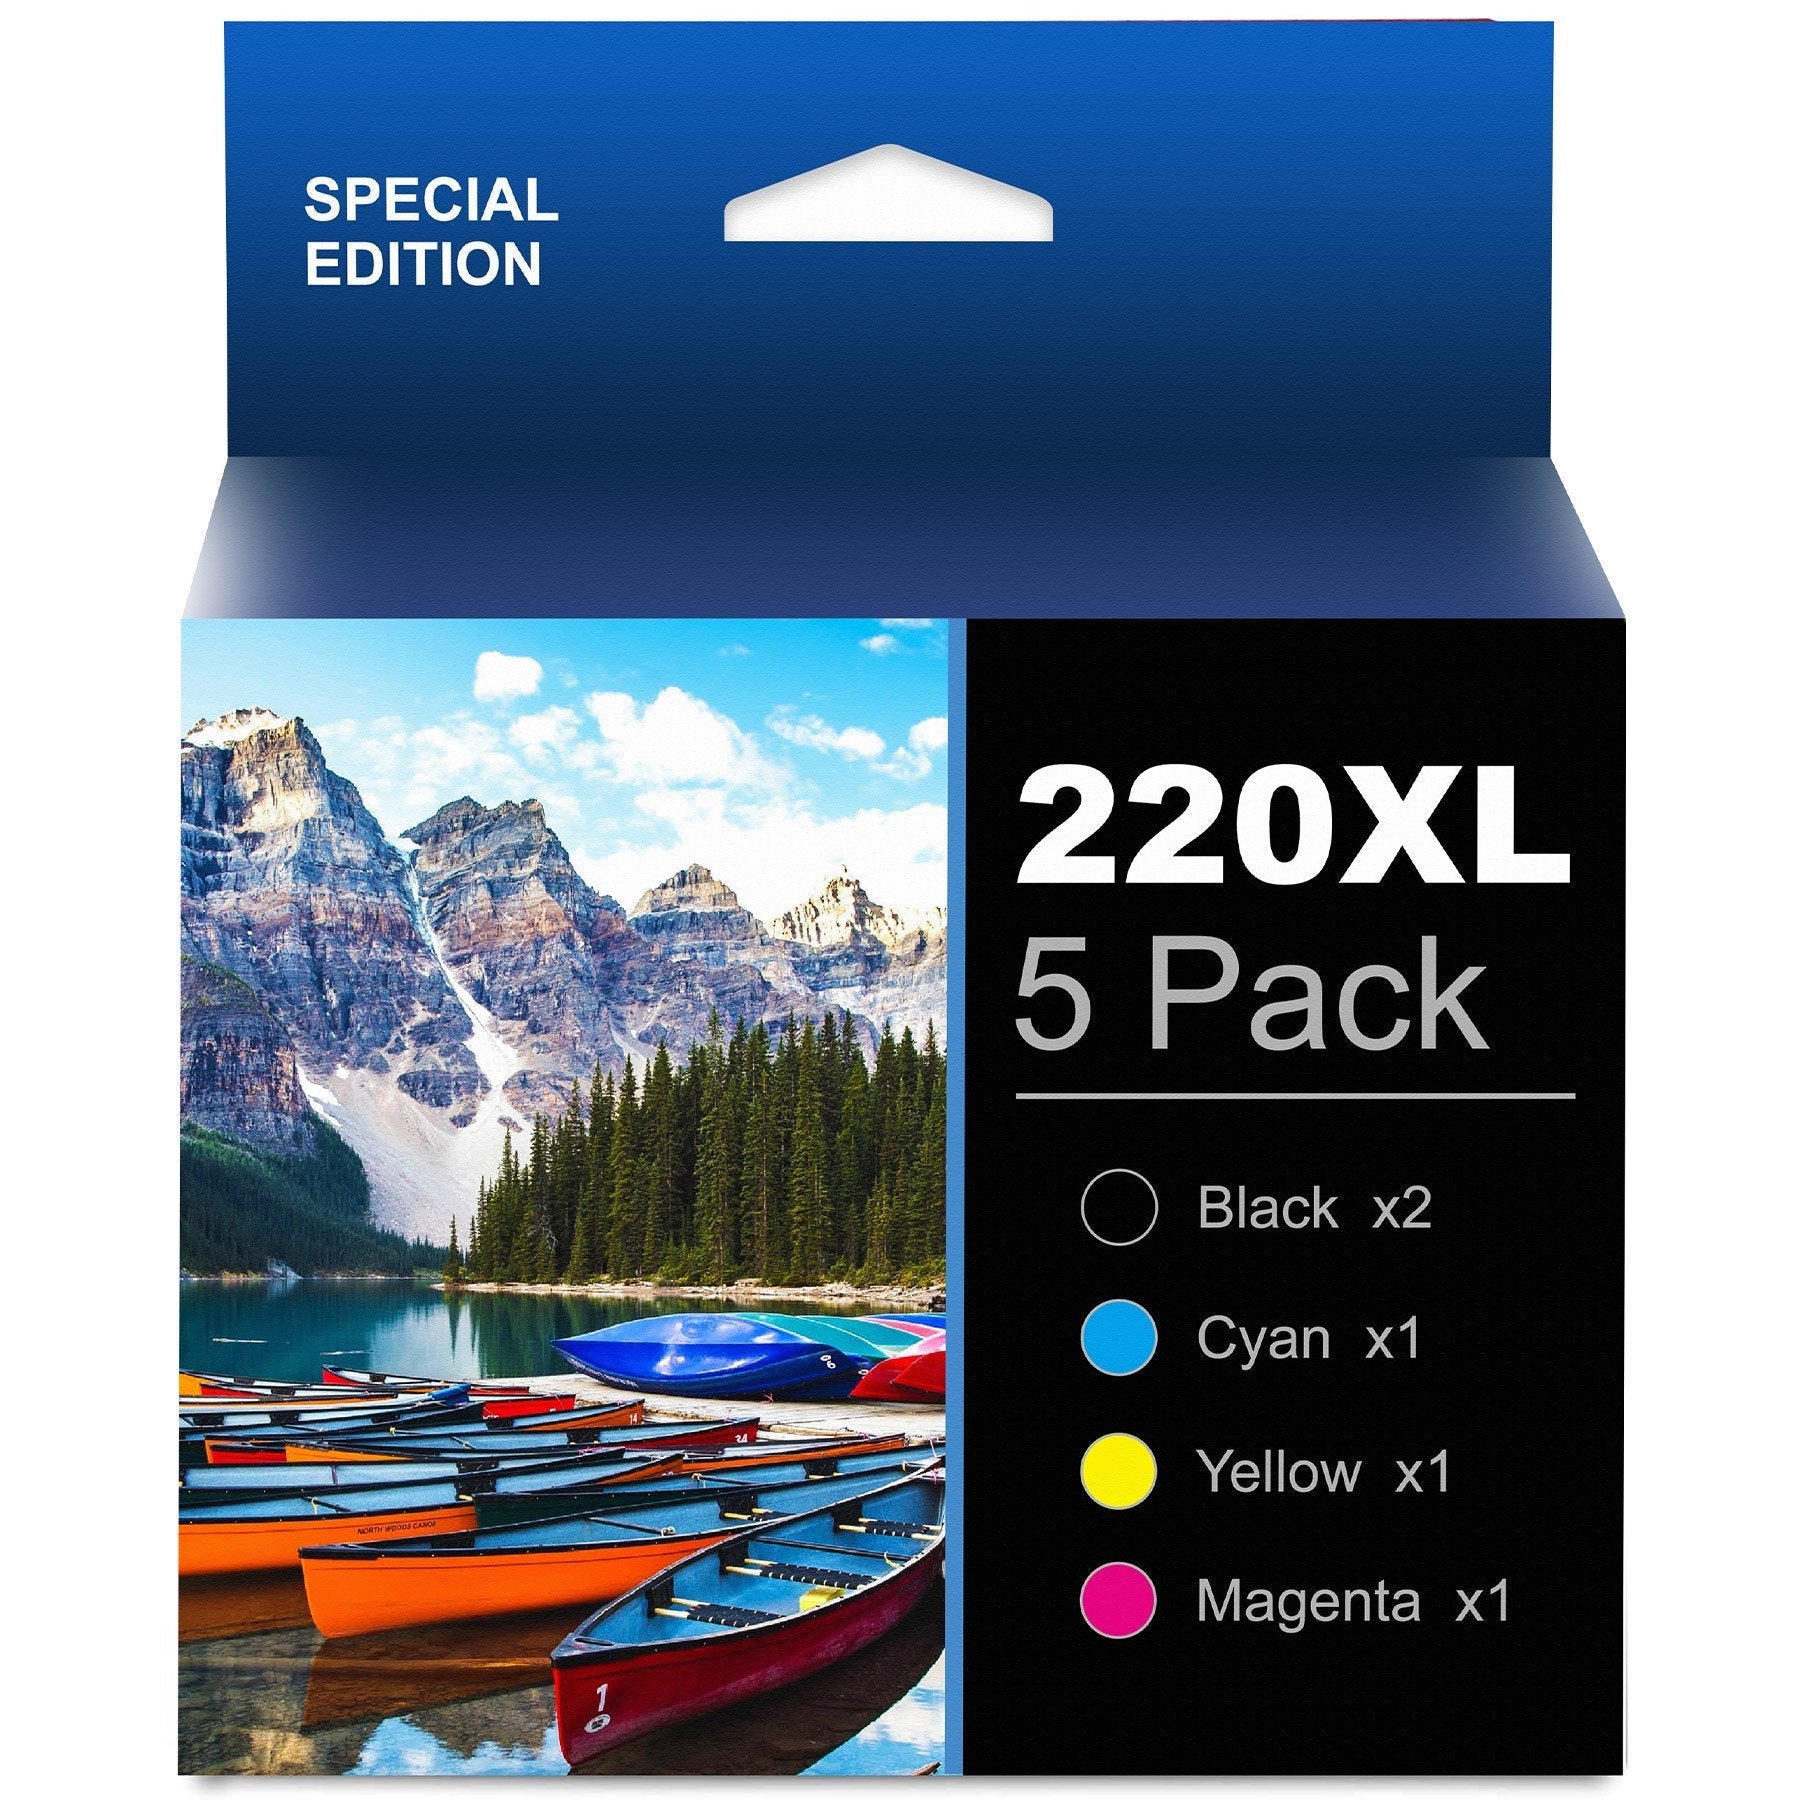 220XL Ink Cartridges Replacement for Epson 220 Ink Cartridge